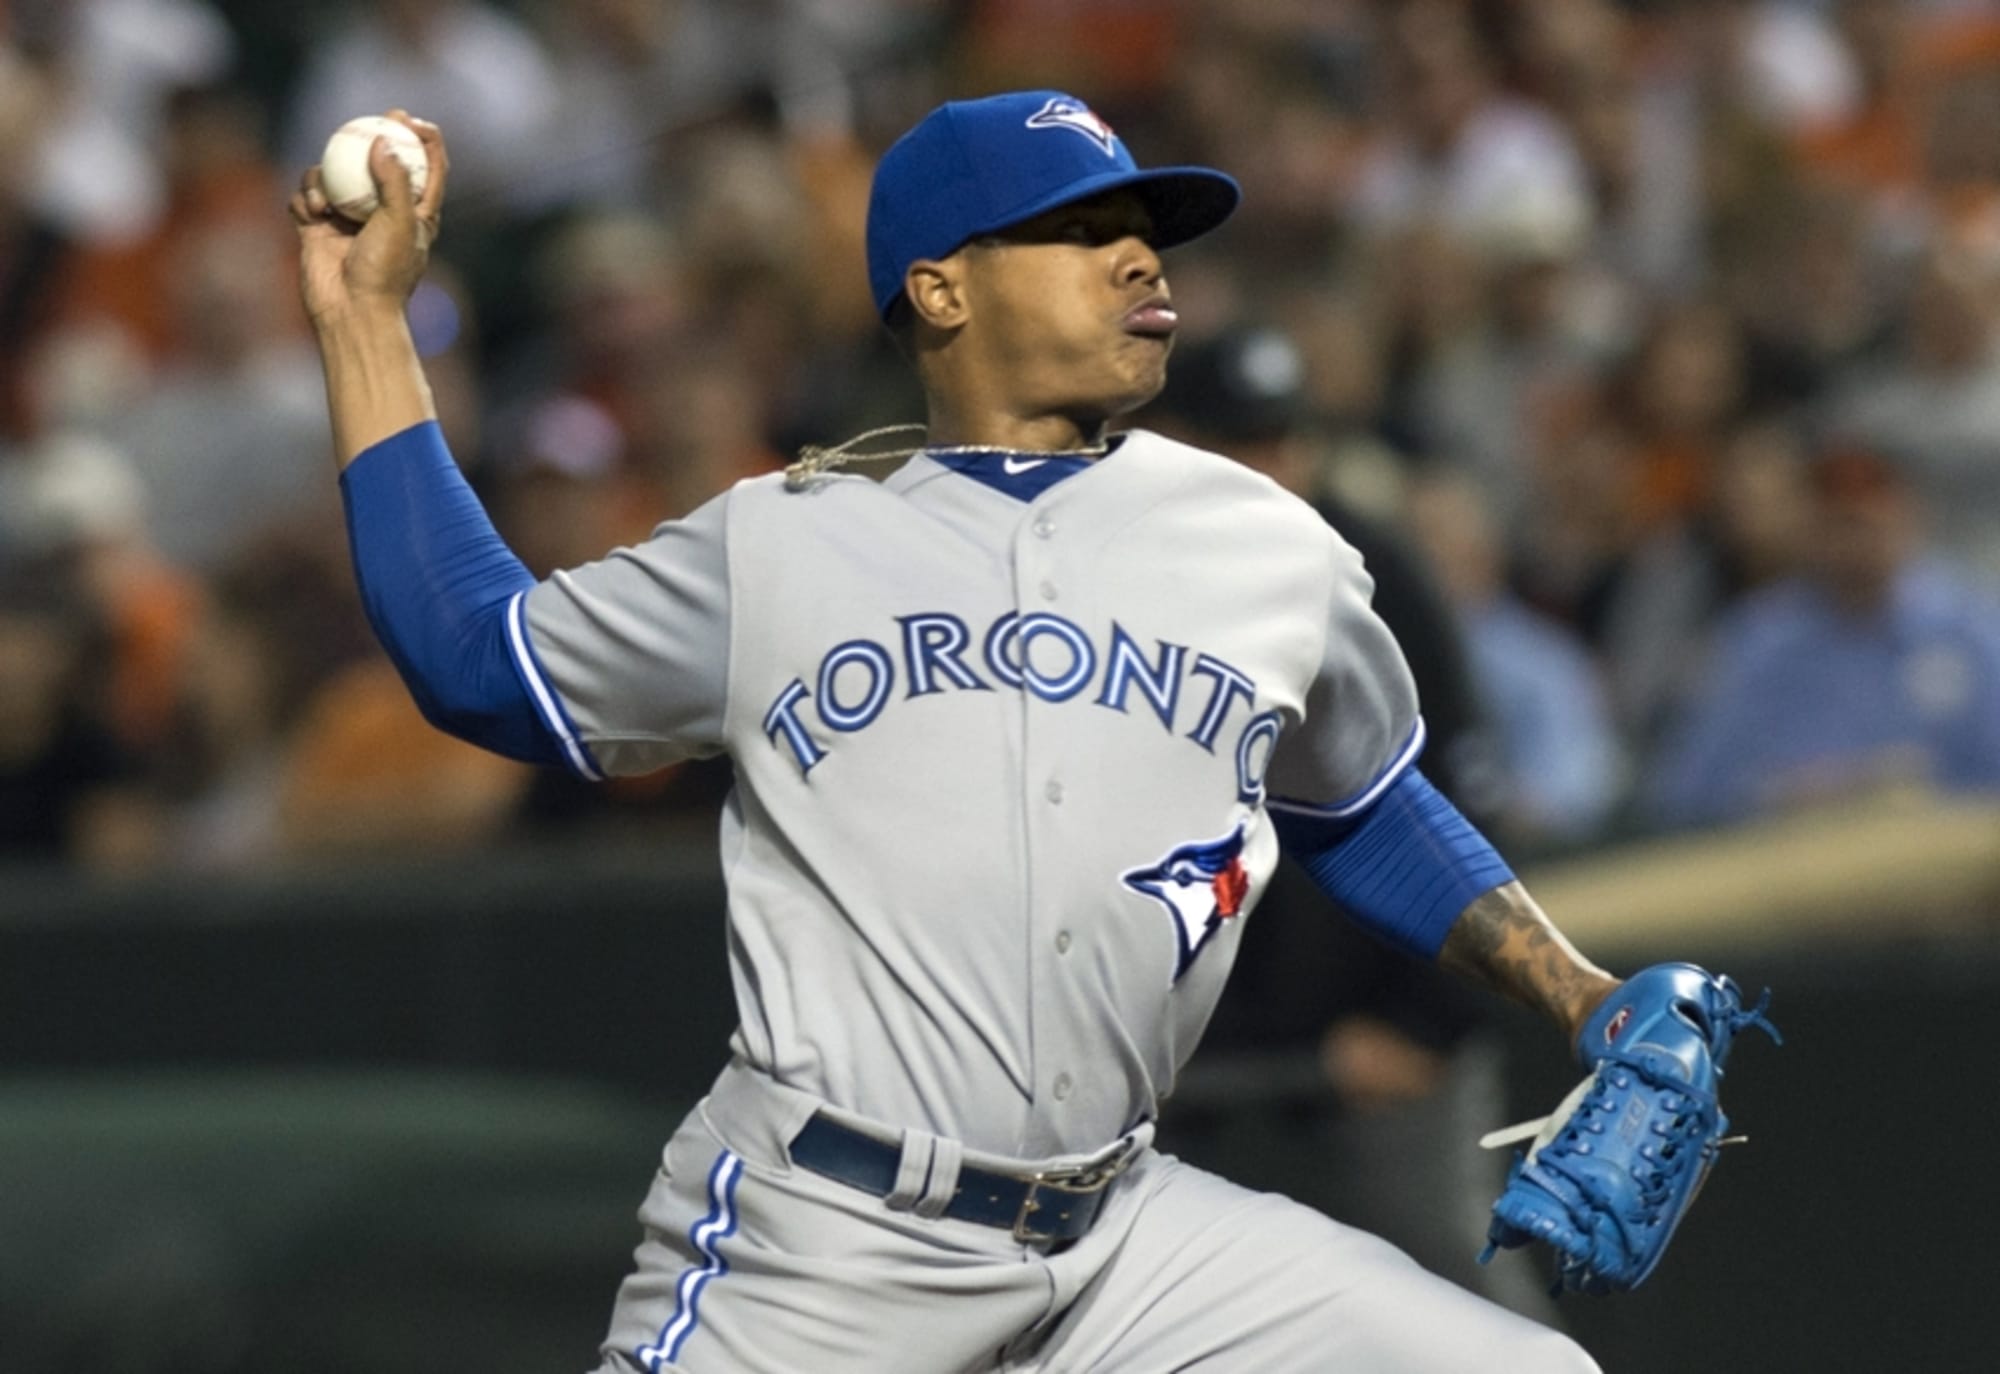 VIDEO: Rookie pitchers Marcus Stroman, Kevin Gausman compete in